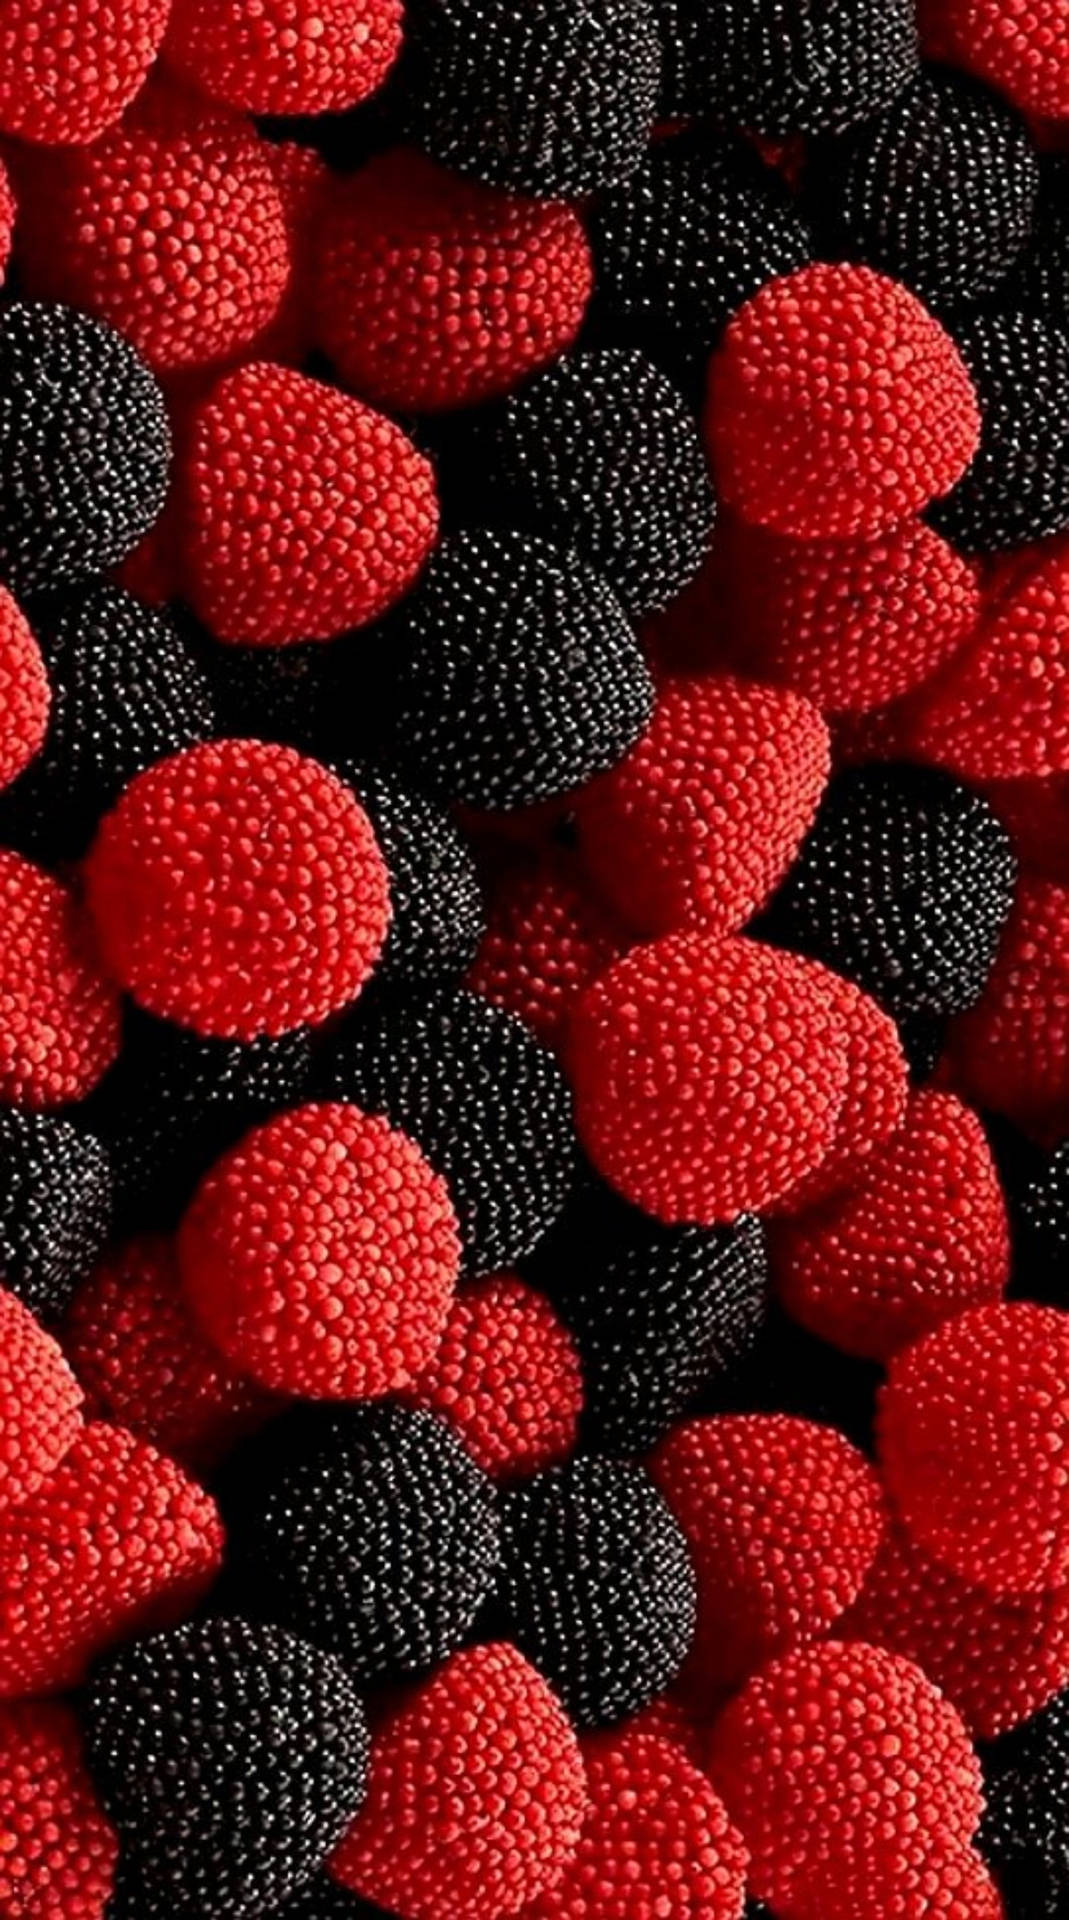 Black And Red Berries Samsung Full Hd